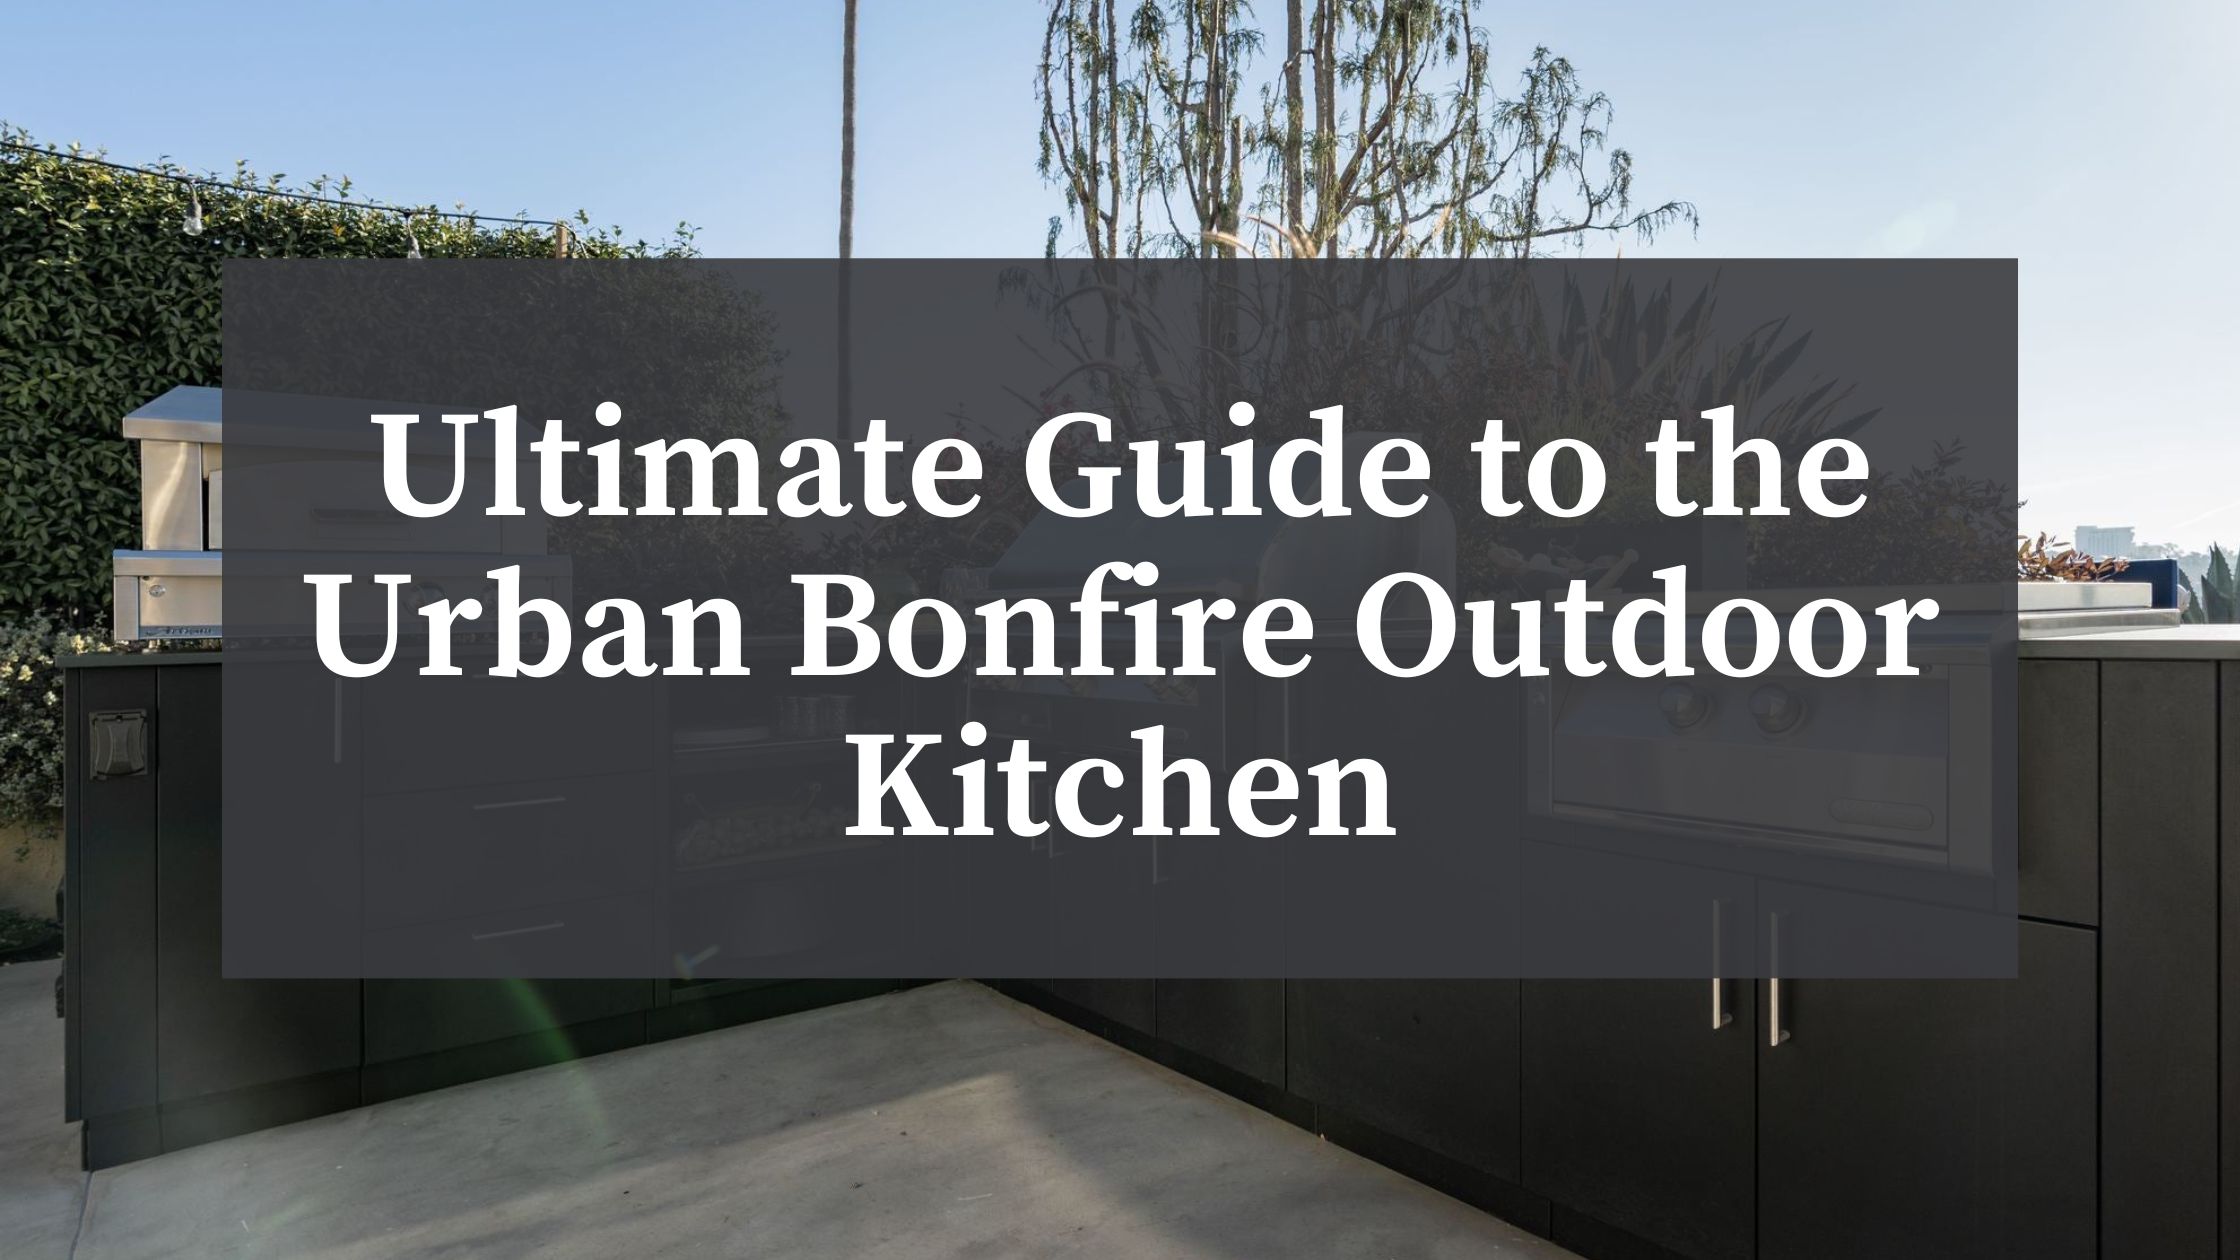 https://blog.athertonappliance.com/wp-content/uploads/2022/07/Ultimate-Guide-to-the-Urban-Bonfire-Outdoor-Kitchen.jpg